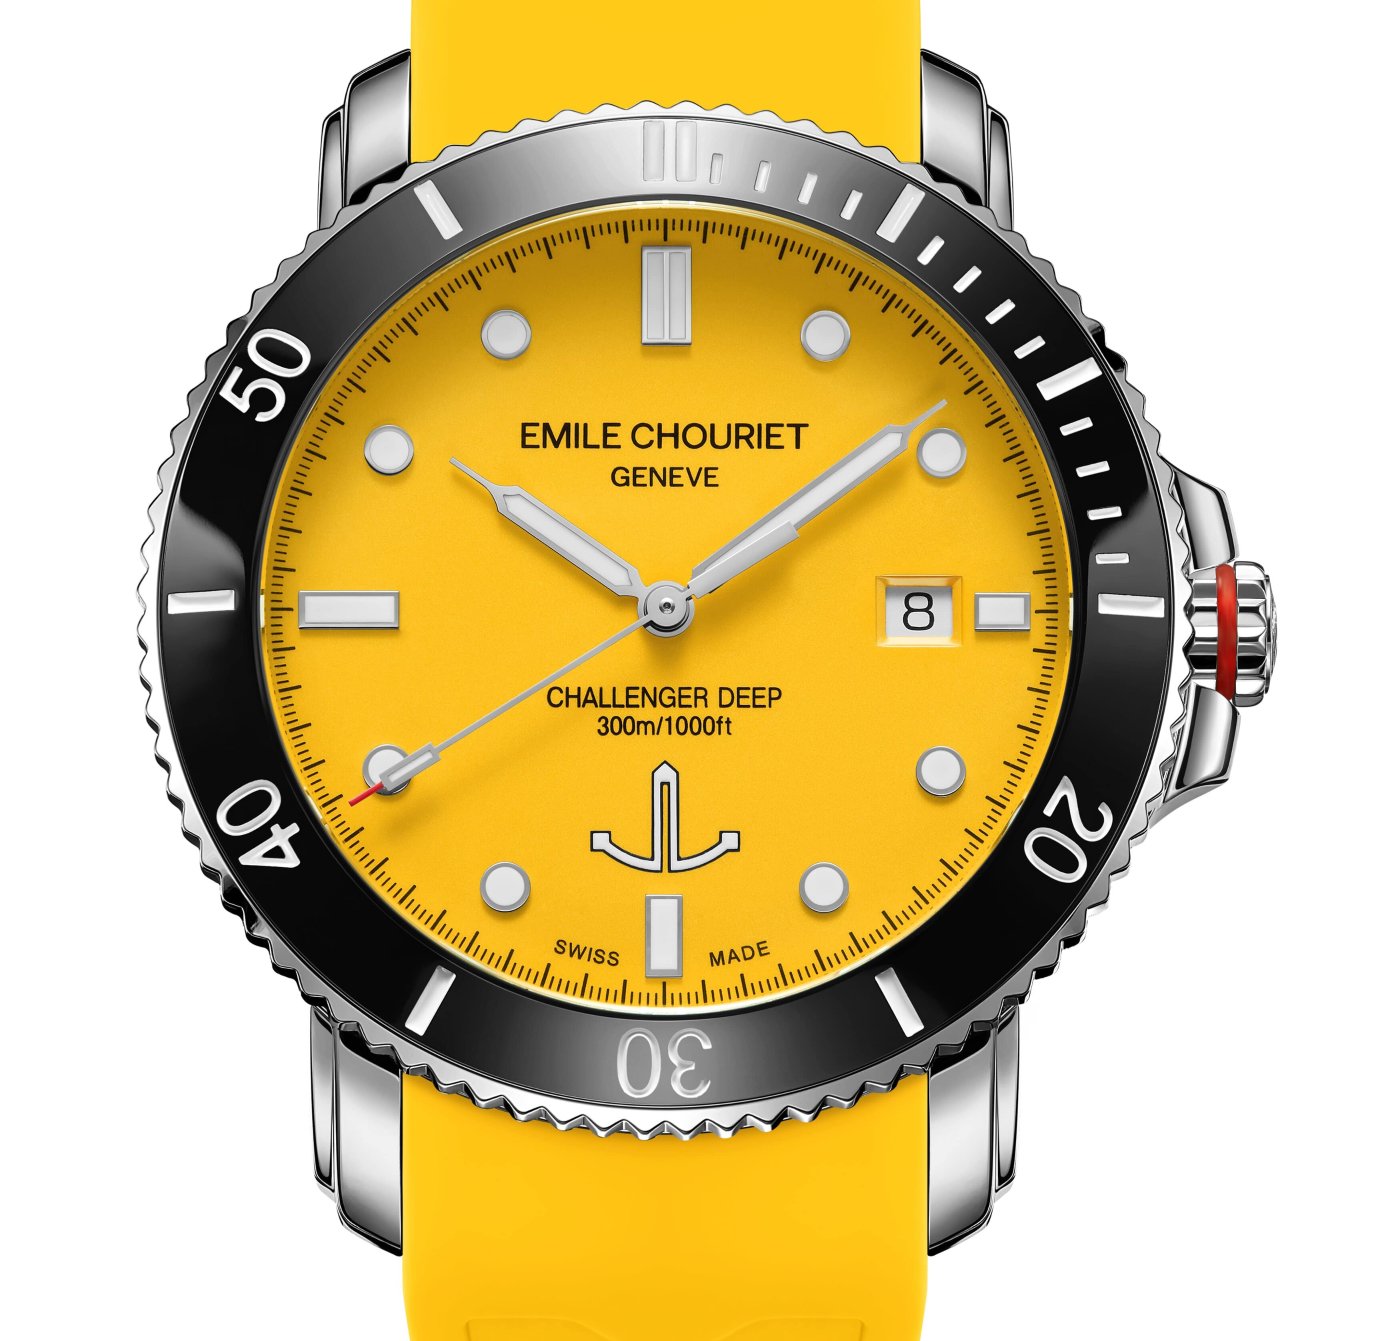 Emile Chouriet: new colours for the Challenger Deep